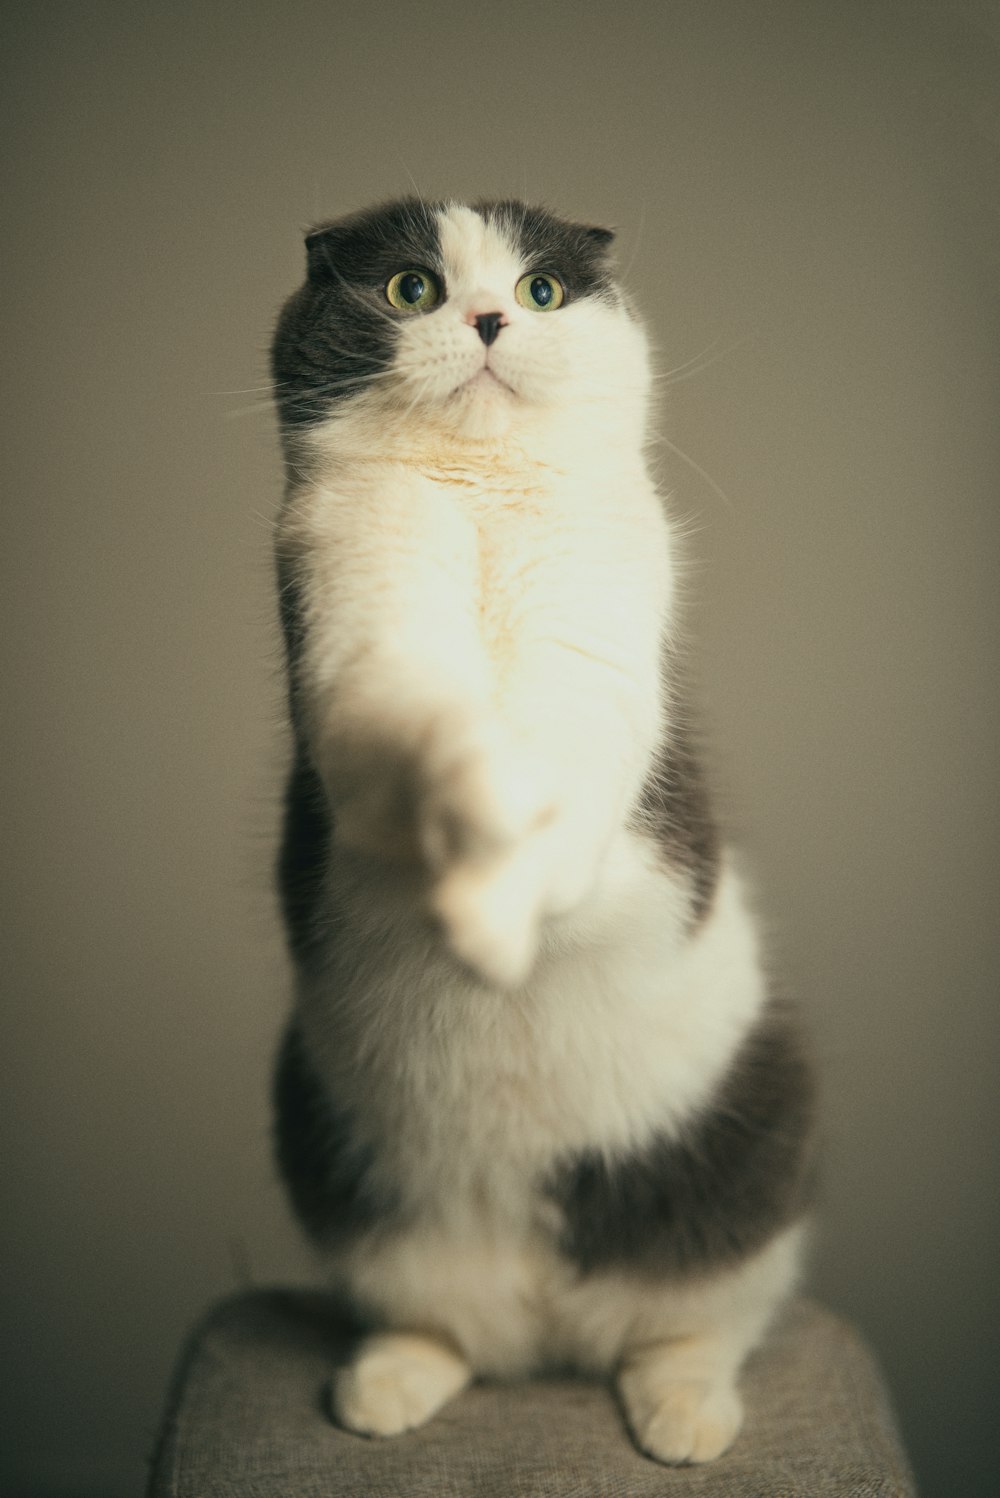 a black and white cat standing on its hind legs